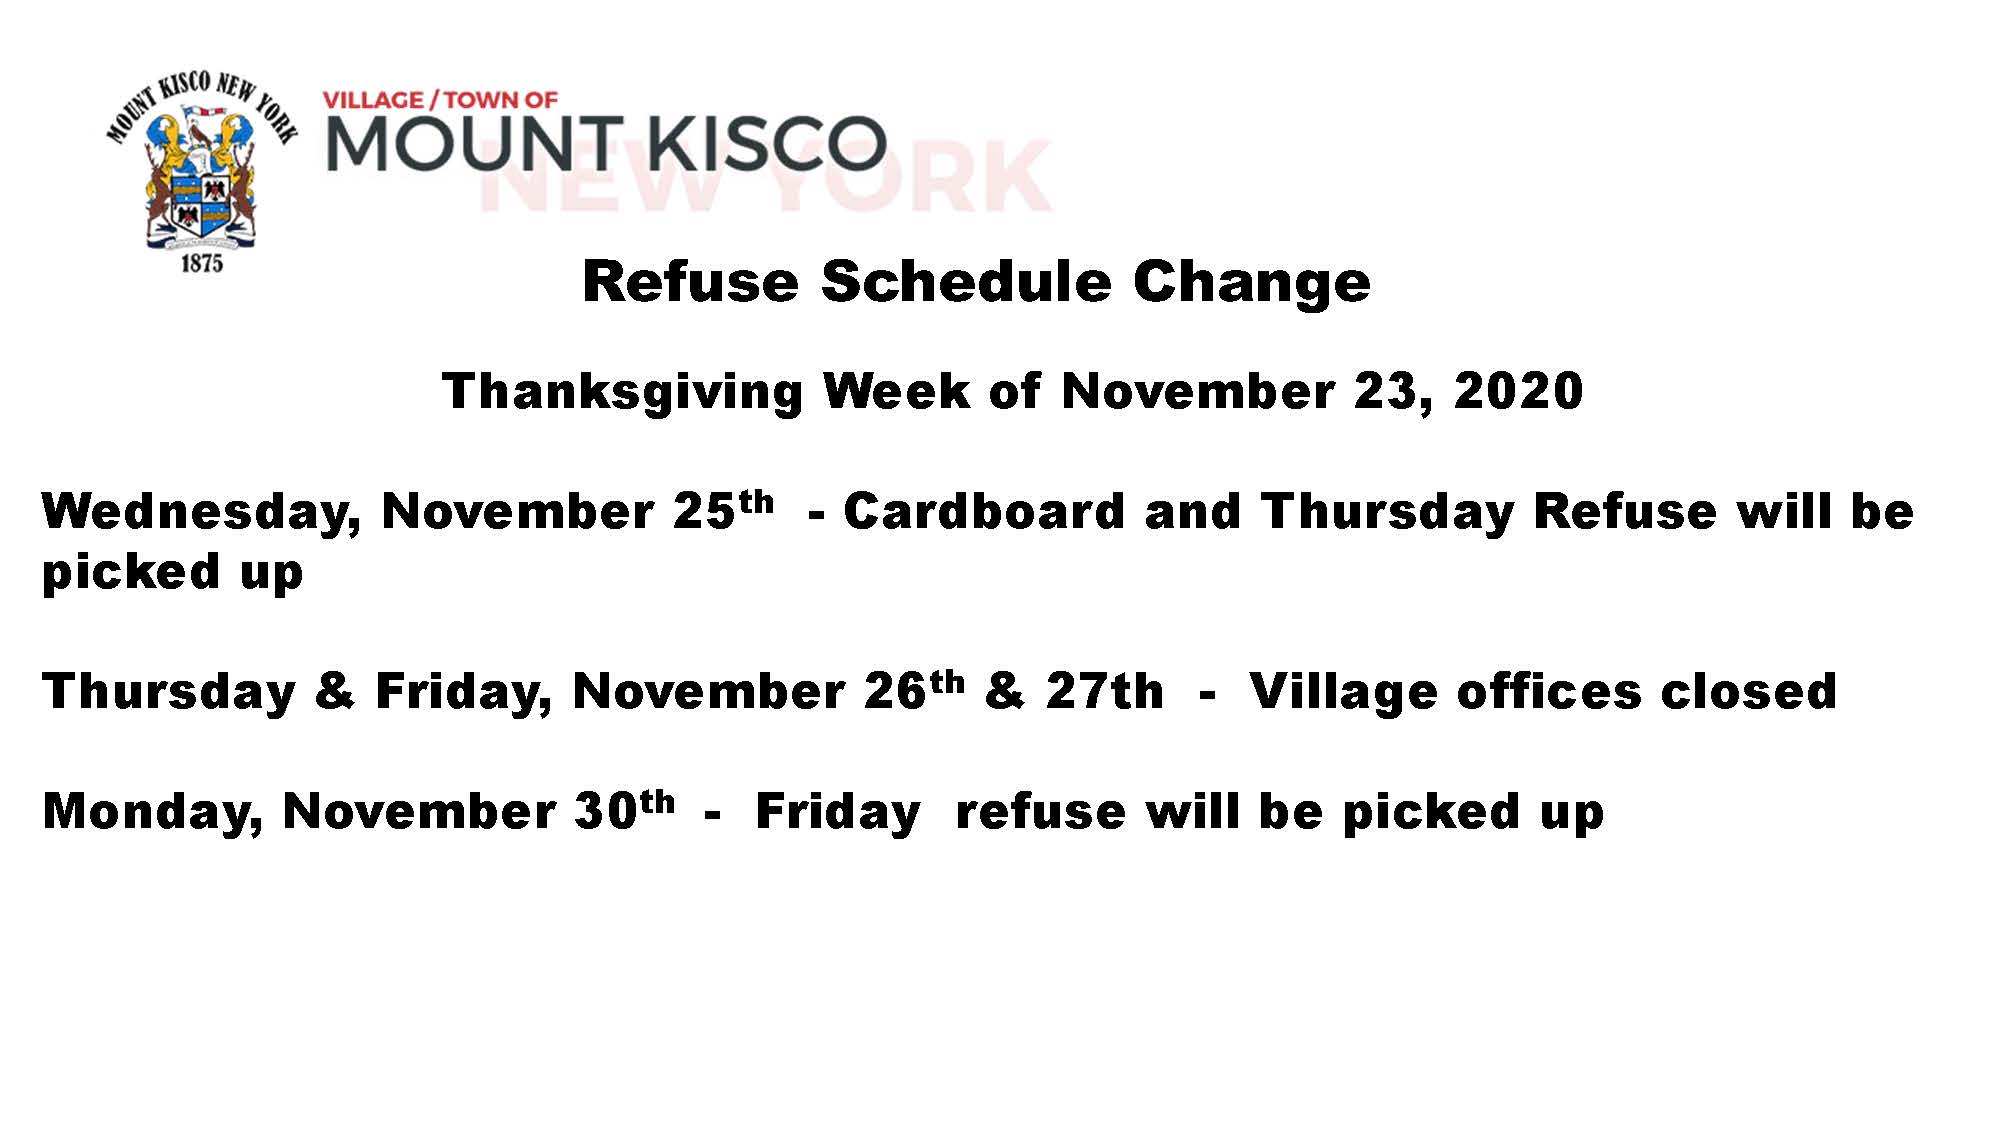 4) a. Thanksgiving refuse schedule